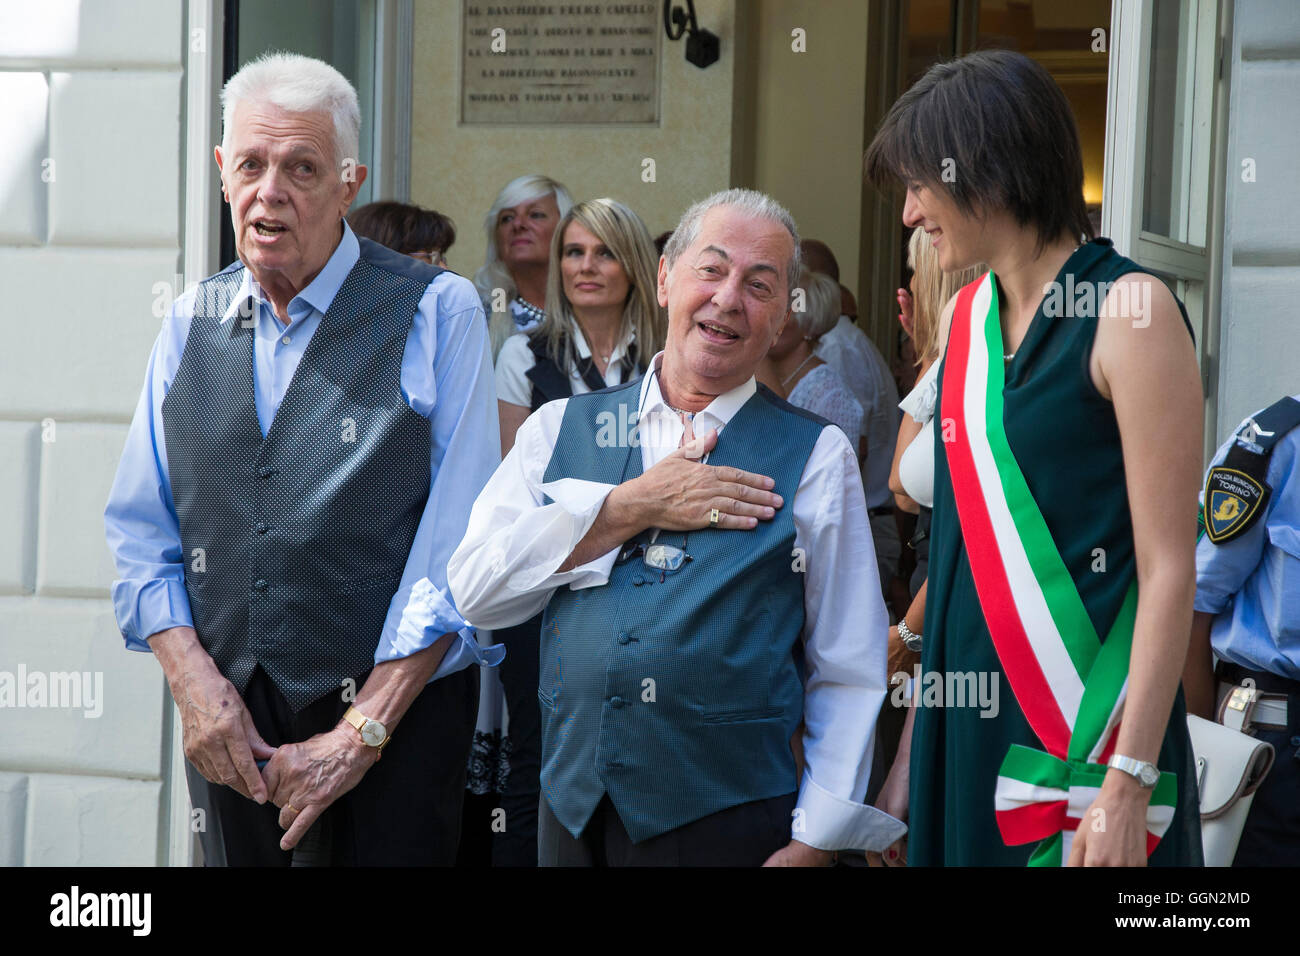 TURIN, ITALY - August 6, 2016: The mayor Chiara Appendino will receive the first declaration  of civil union constitution in Turin.  The first 'civilly united' will Franco and Gianni, respectively 82 and 79 years in a relationship that  has lasted more than 50 years 6 August 2016 in Turin, Italy Credit:  Black Mail Press/Alamy Live News Stock Photo